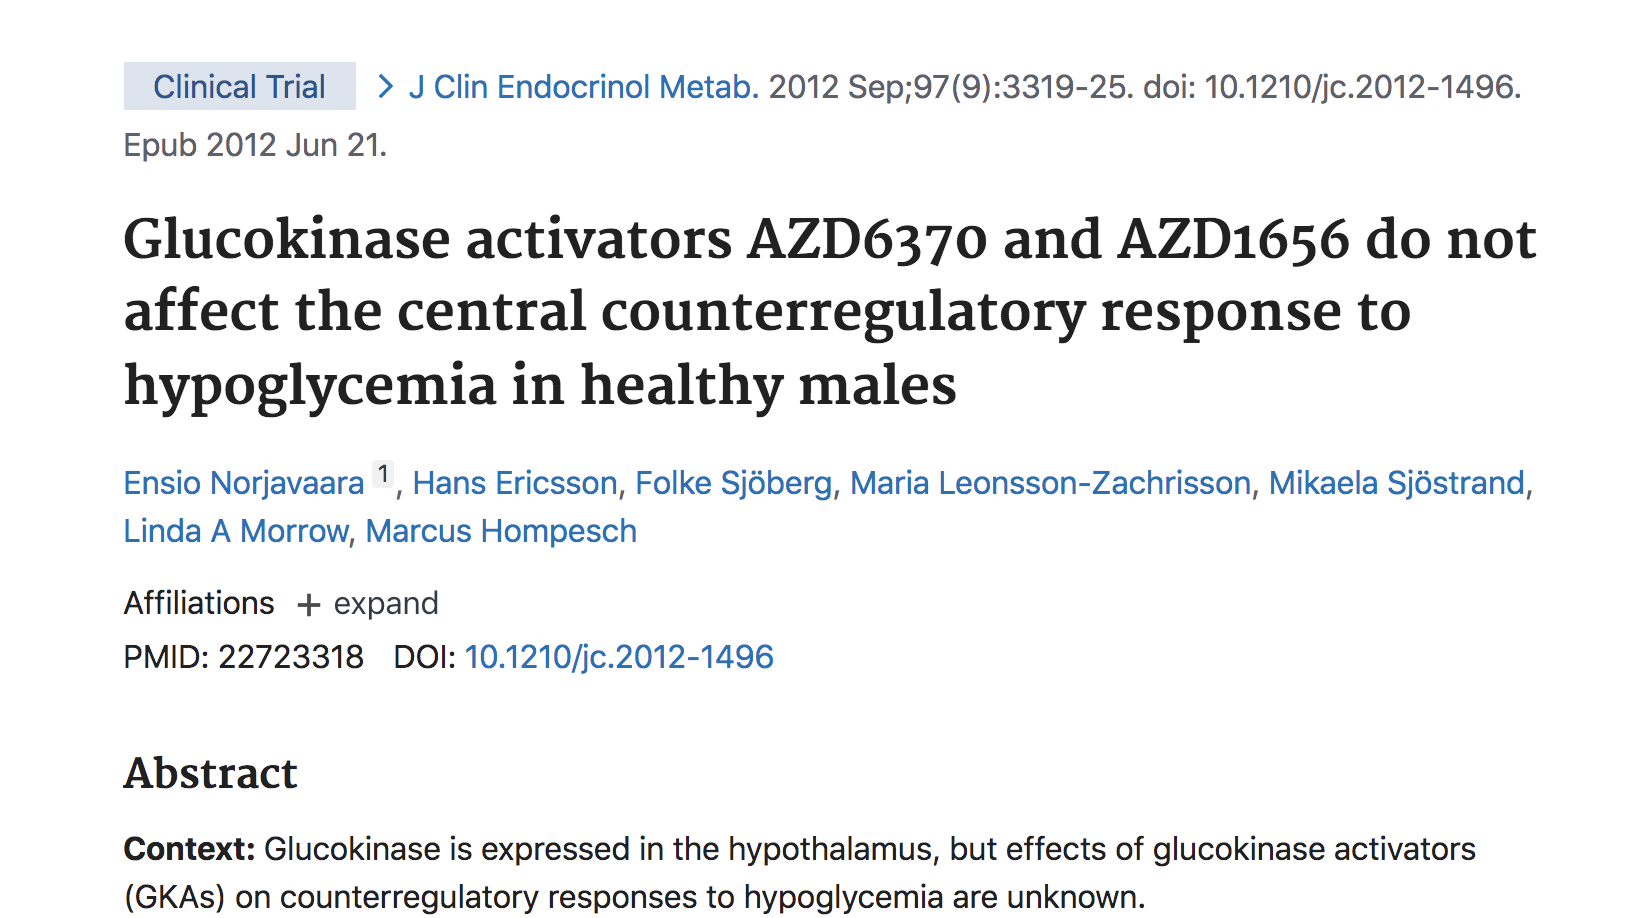 image of Glucokinase activators AZD6370 and AZD1656 do not affect the central counterregulatory response to hypoglycemia in healthy males